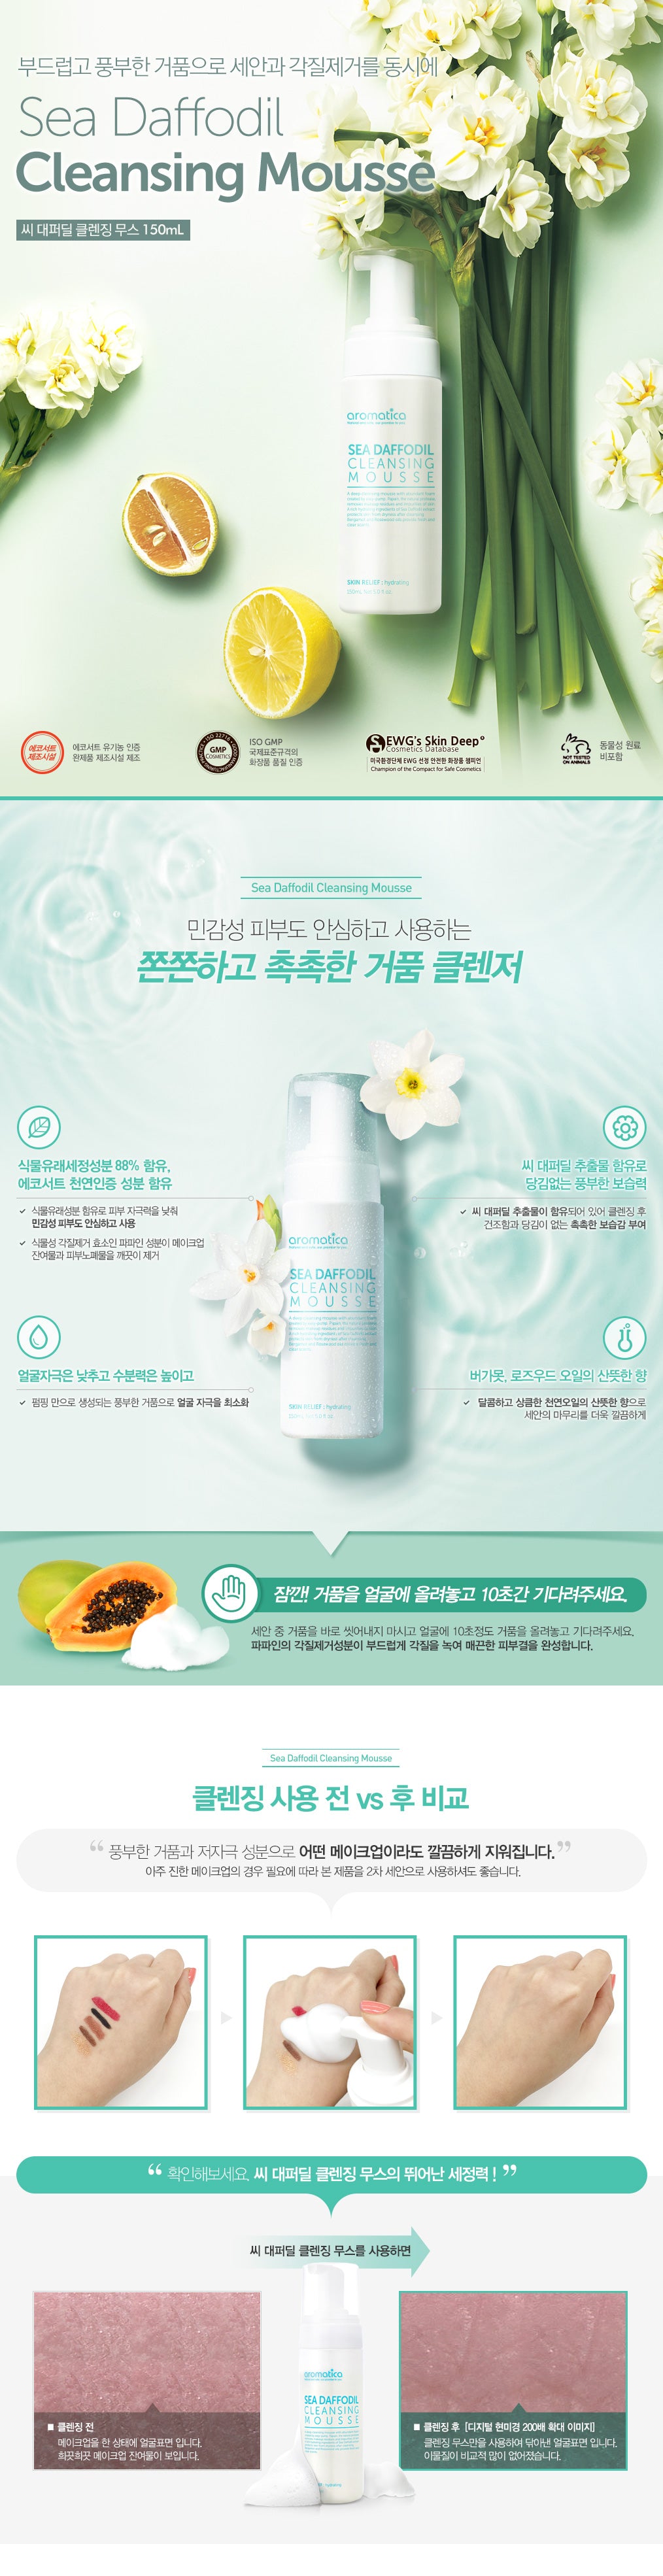 Aromatica - Sea Daffodil Cleansing Mousse